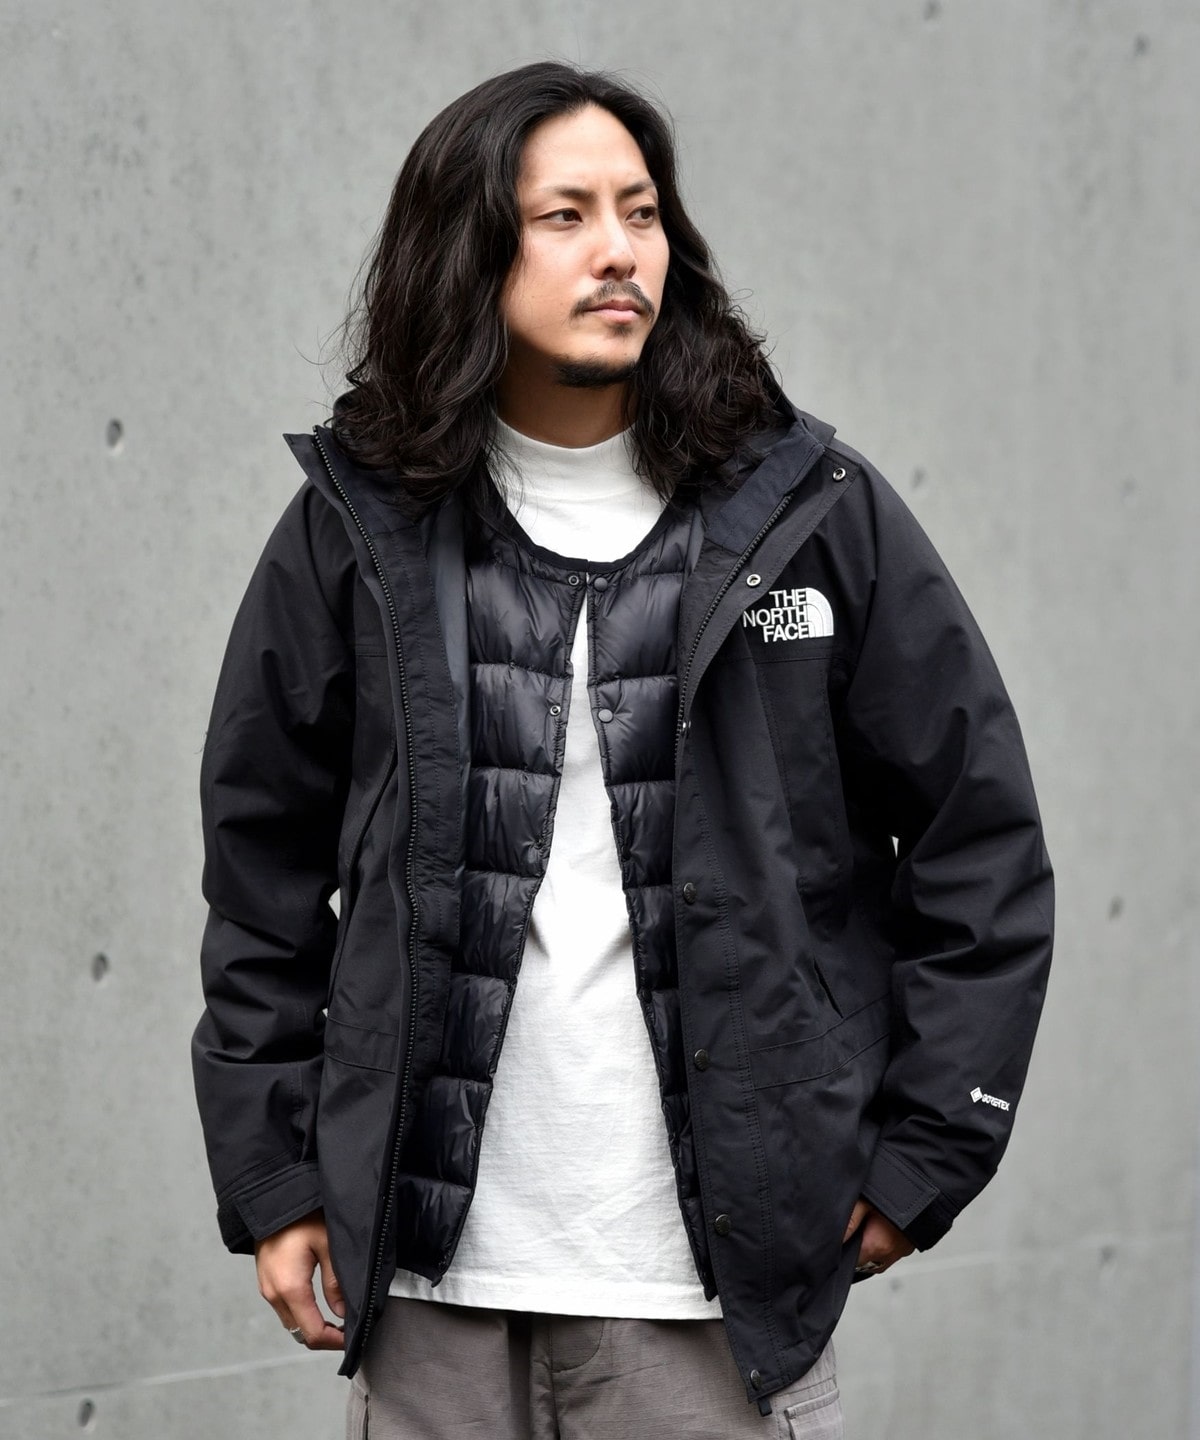 WEB限定】NORTH FACE: Mountain Light Jacket/マウンテン ライト 